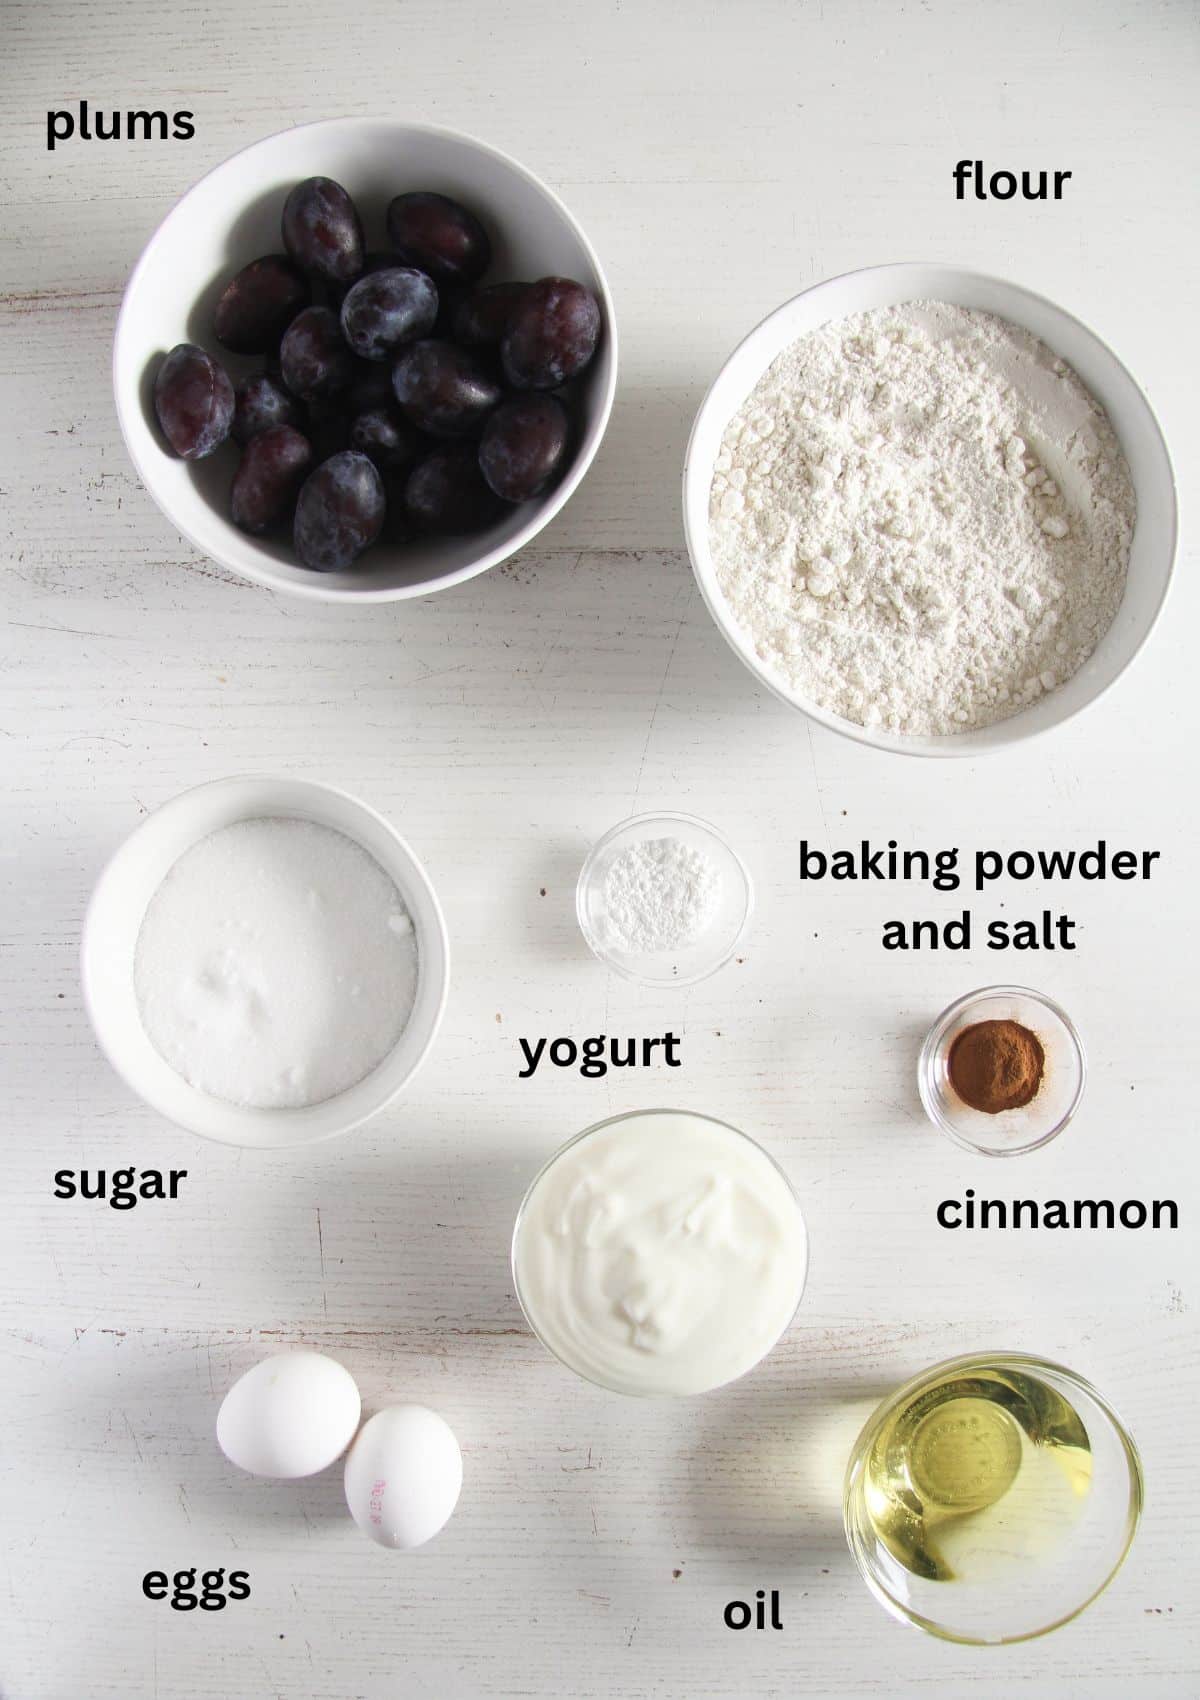 listed ingredients for making muffins with plums, yogurt and cinnamon.